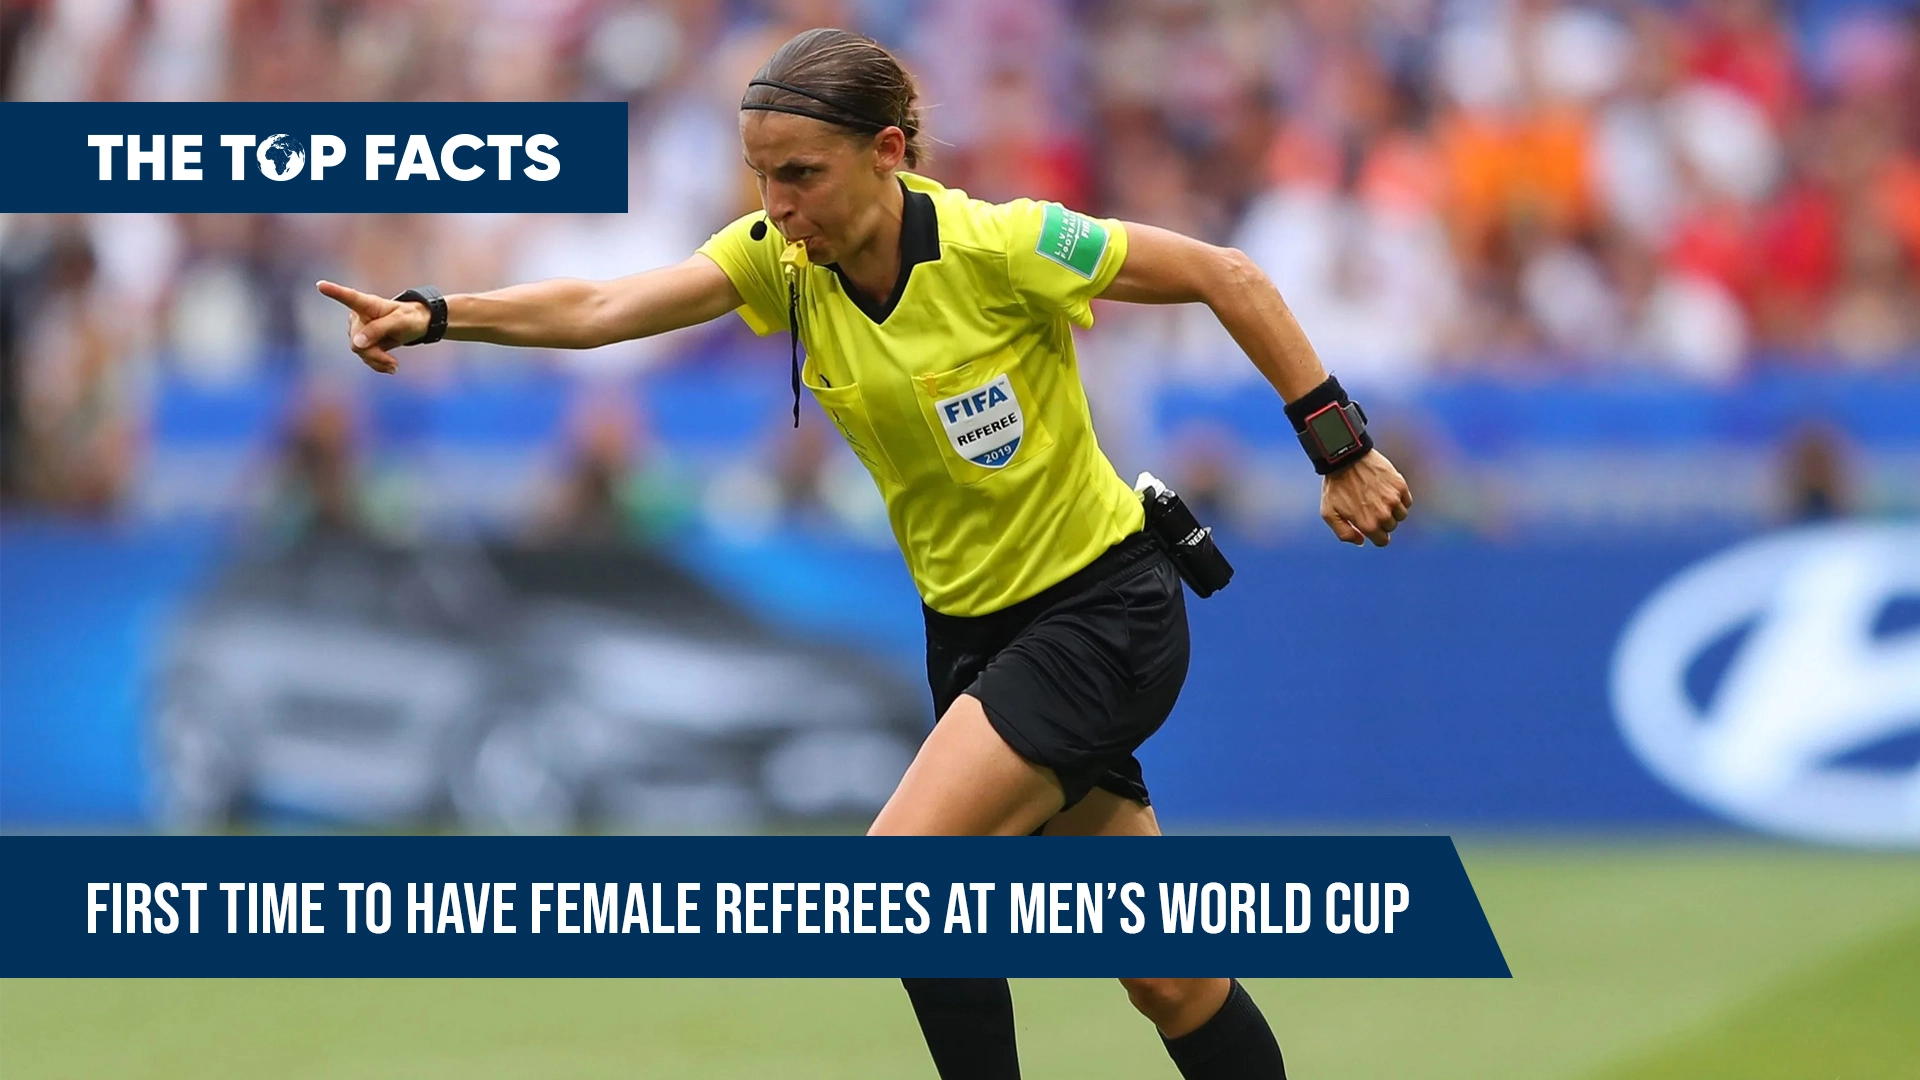 Women make history as referees at men's World Cup